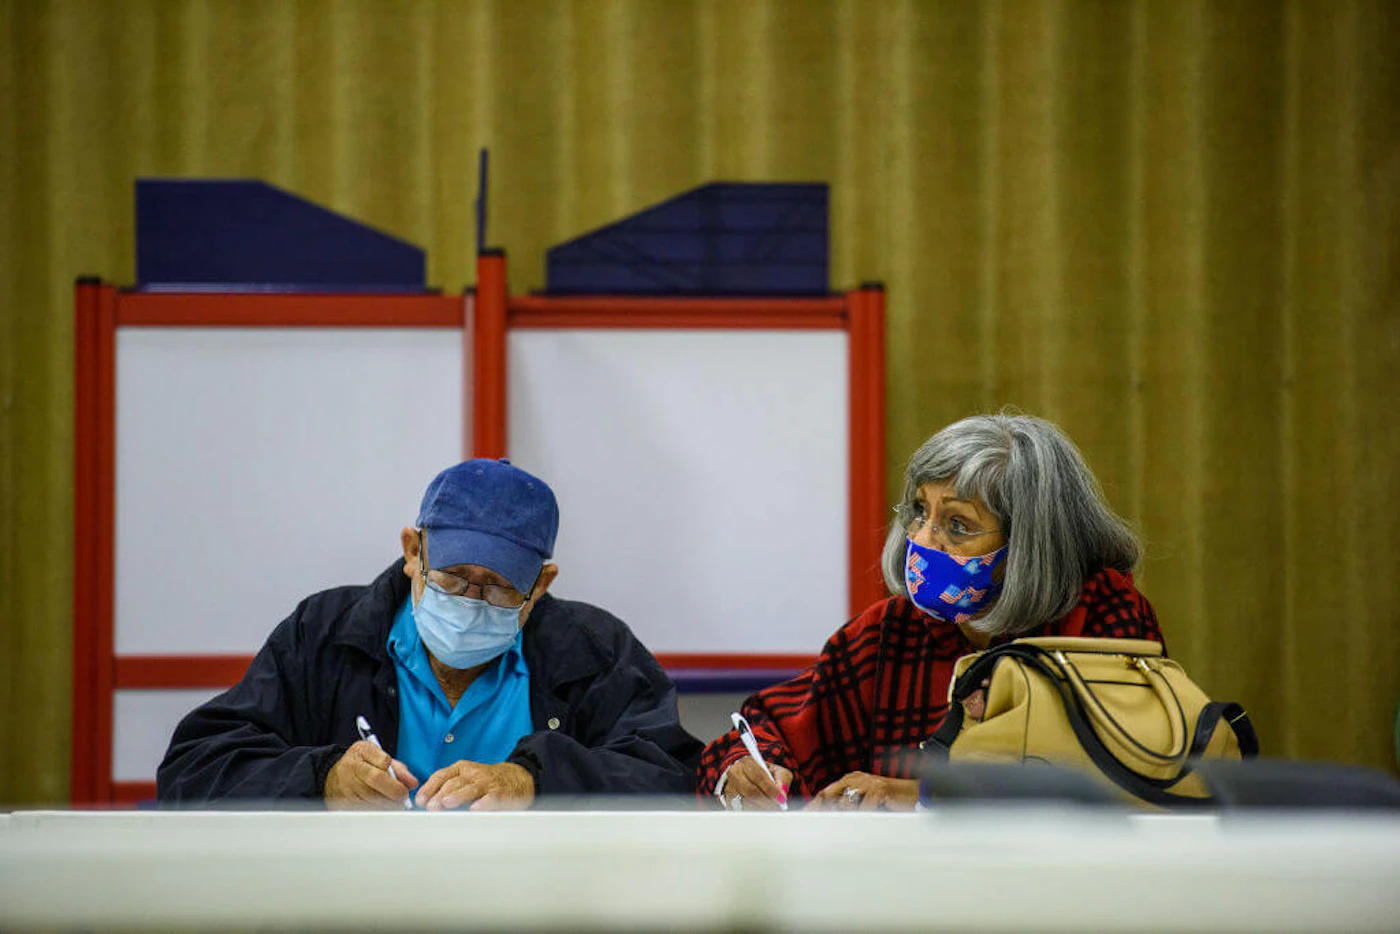 A couple fills out ballots together at the O.P. Owens Building on November 3, 2020  in Lumberton, North Carolina.  After a record-breaking turnout during the 2020 election, Democrats and Republicans are at odds over Democrats plans to expand voting access through the 'For the People Act.' (Photo by Melissa Sue Gerrits/Getty Images)